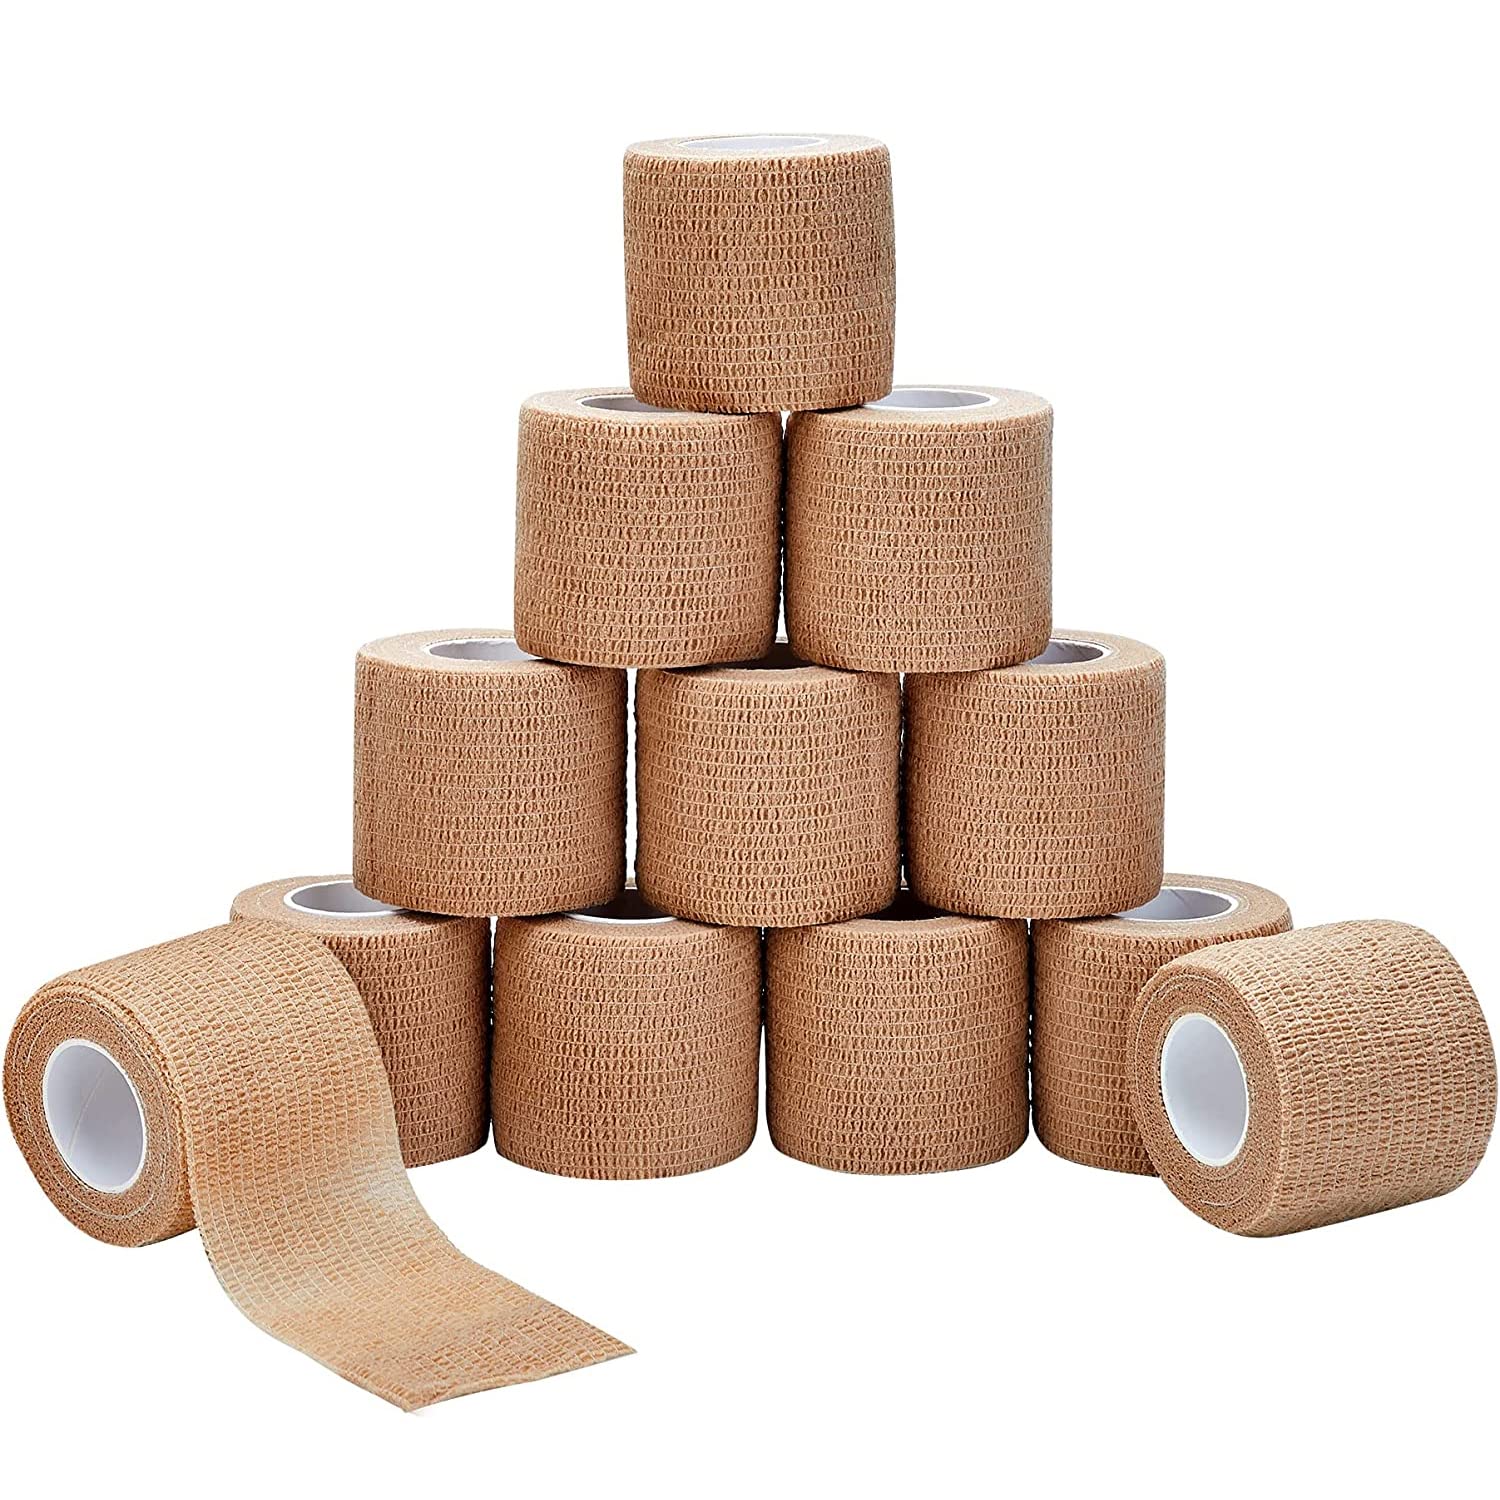 Book Cover Self Adhesive Bandage wrap - 2 Inches by 5 Yards Cohesive Bandage for All Sports (Pack of 12) | Brown Non-Woven Self adhering Bandage Wrap | Breathable Athletic Tape for Wrists, Knee and Ankle 2 Inch 12 pack